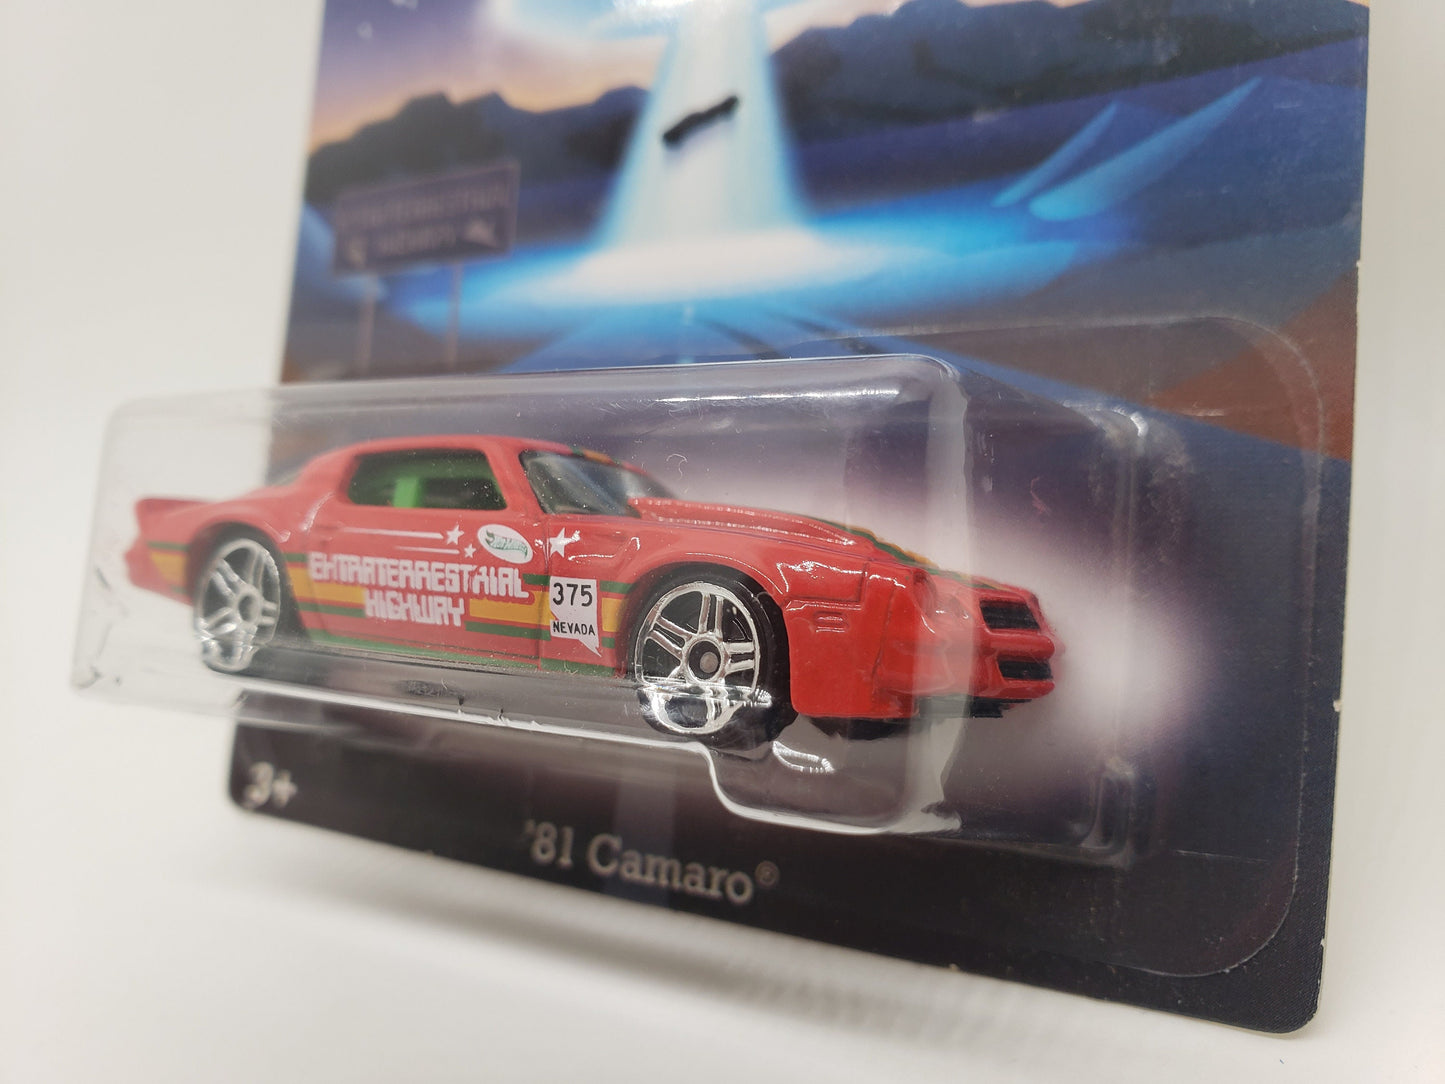 Hot Wheels '81 Camaro Red HW Road Trippin Perfect Birthday Gift Miniature Collectable Scale Model Toy Car